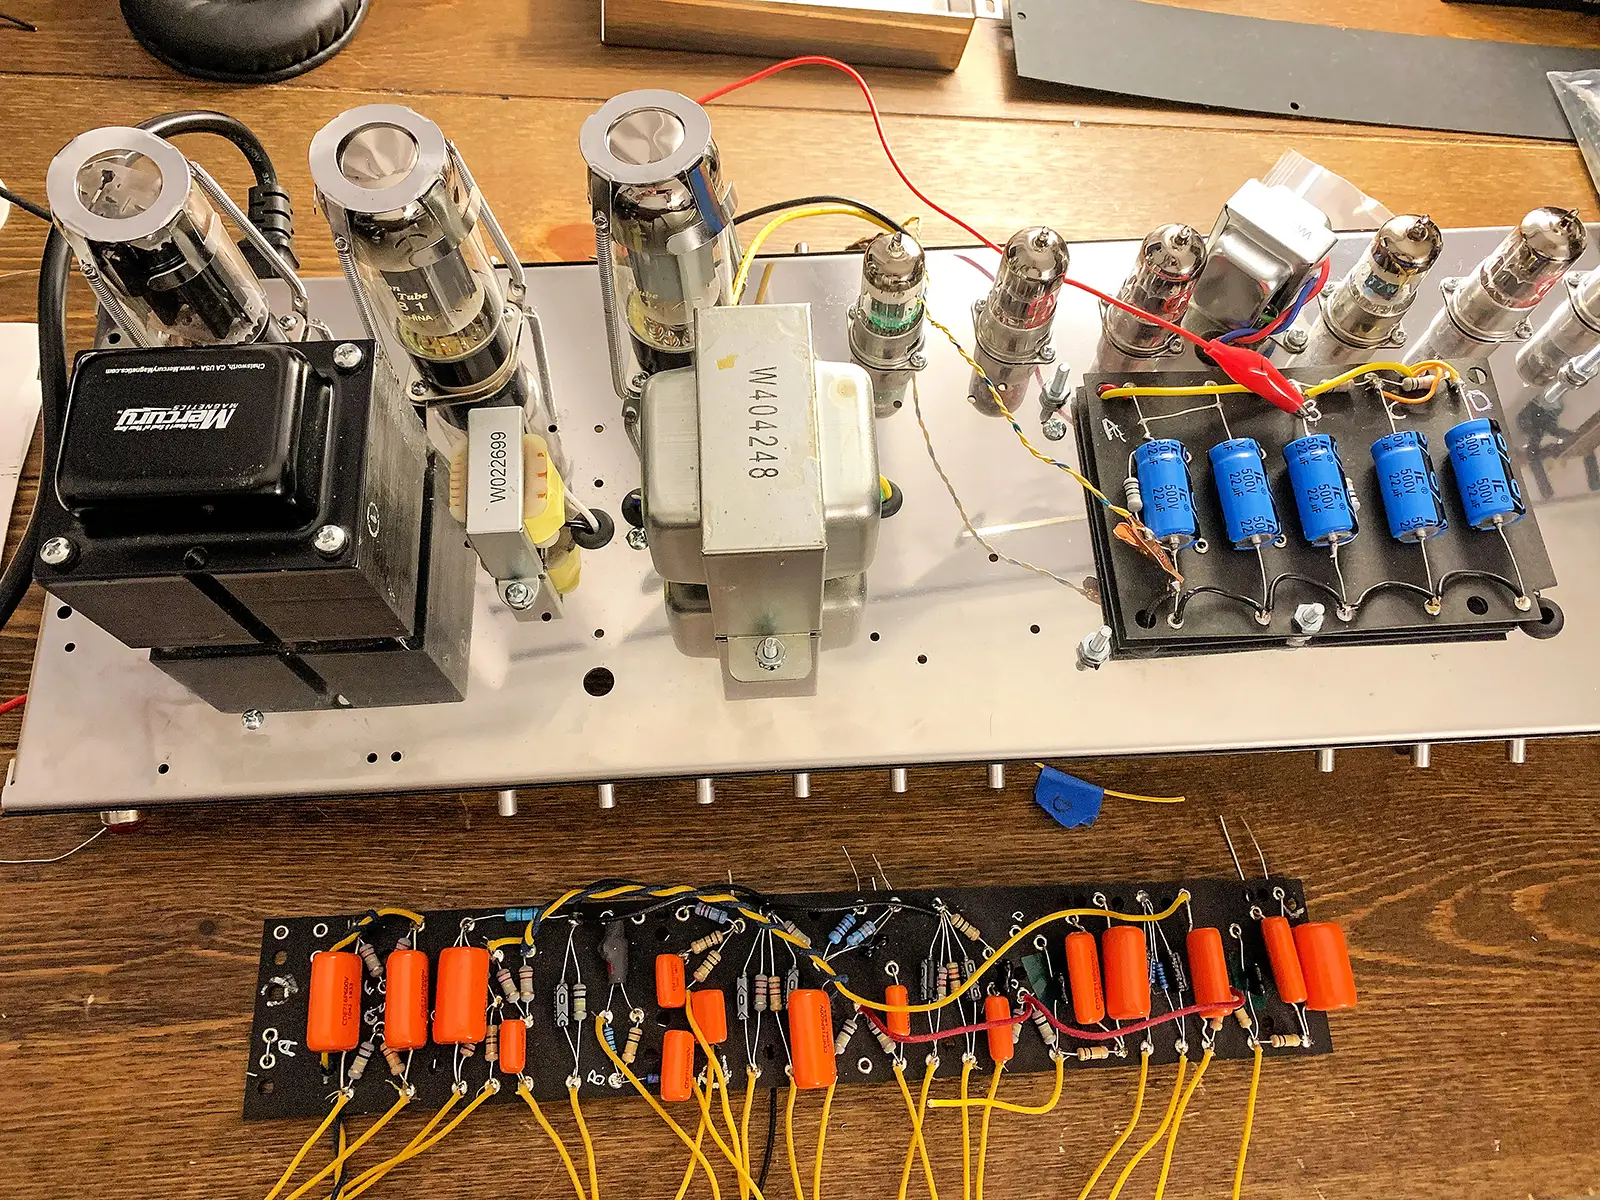 1965 Deluxe Reverb High Power Guitar Amp Build by Sean Rose